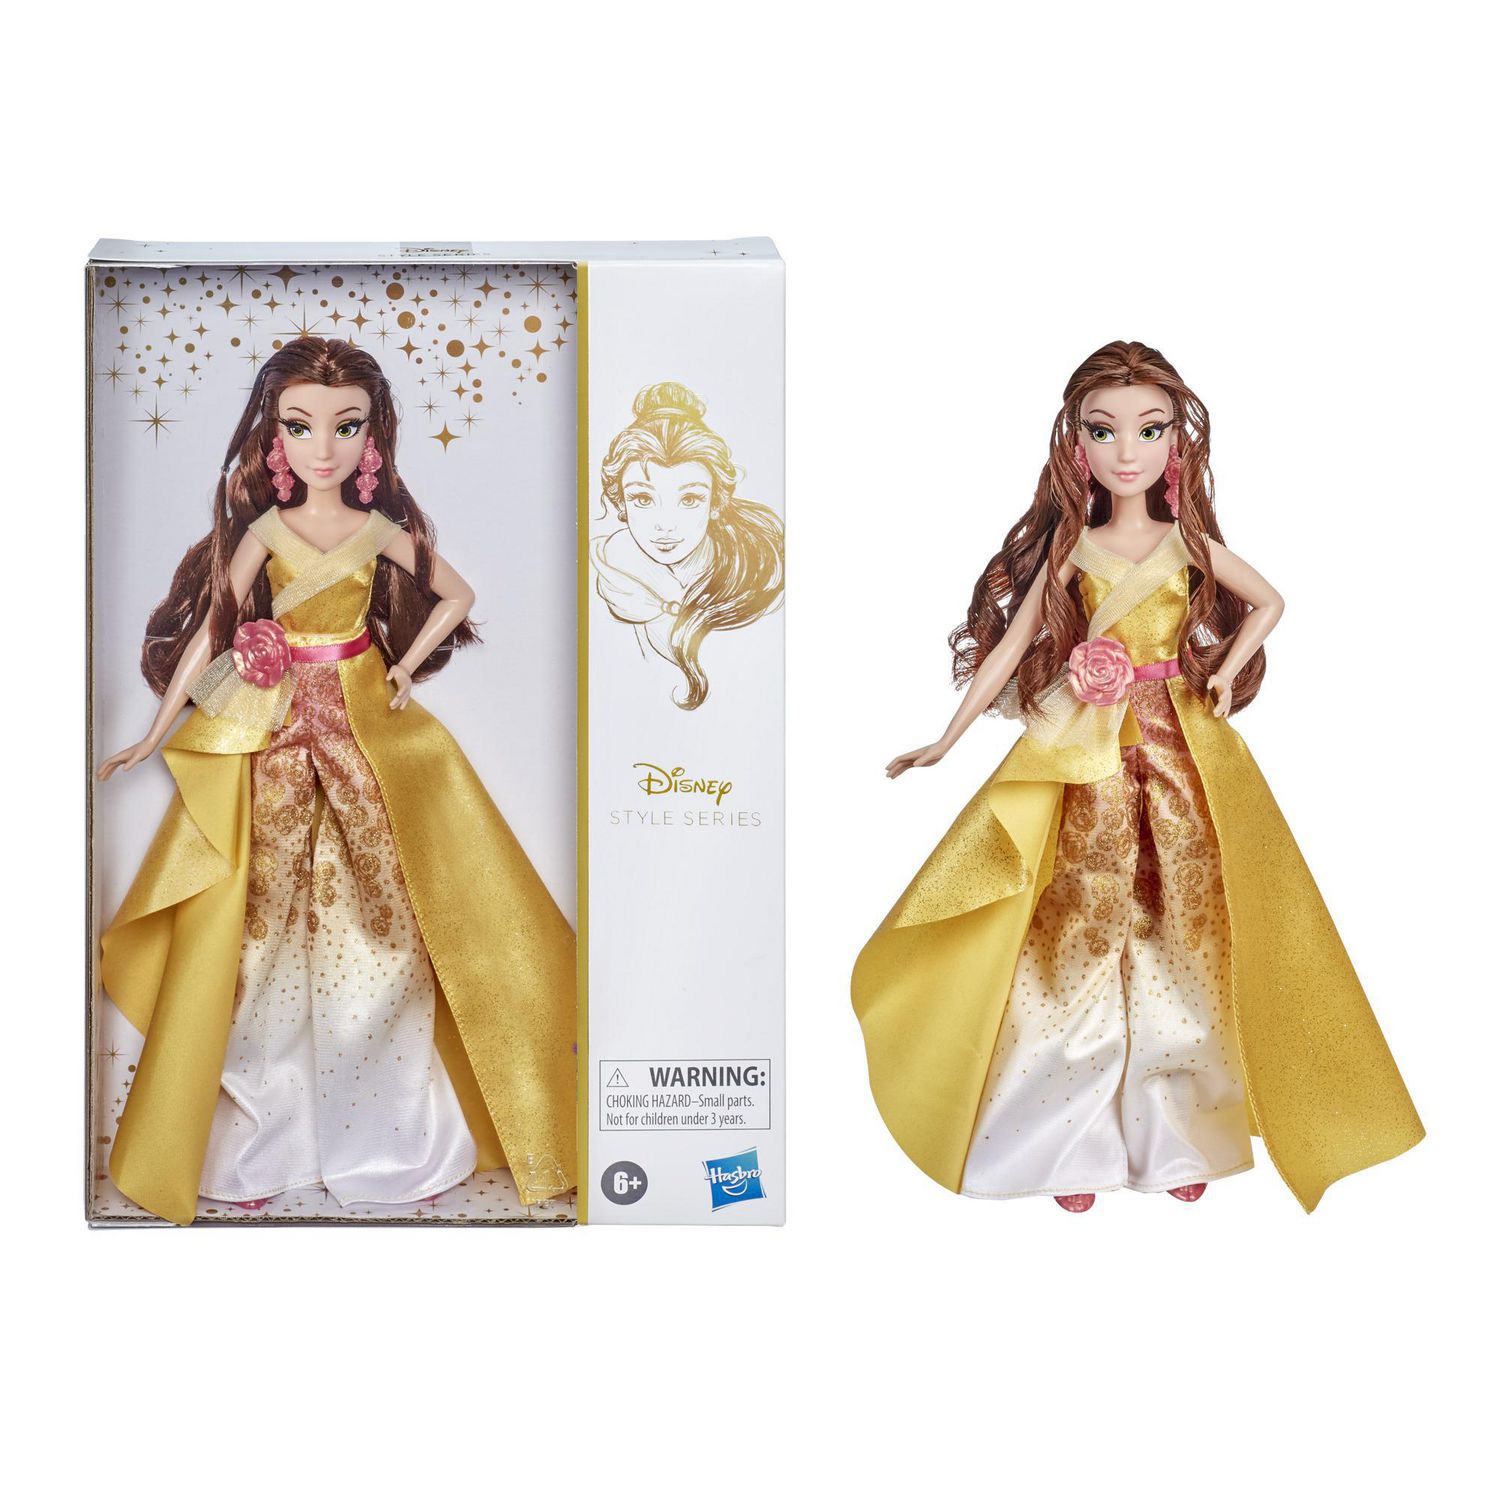 Disney Princess Style Series 08 Belle, Contemporary Style Fashion Doll with  Accessories, Collectable Toy for Girls 6 Years and Up